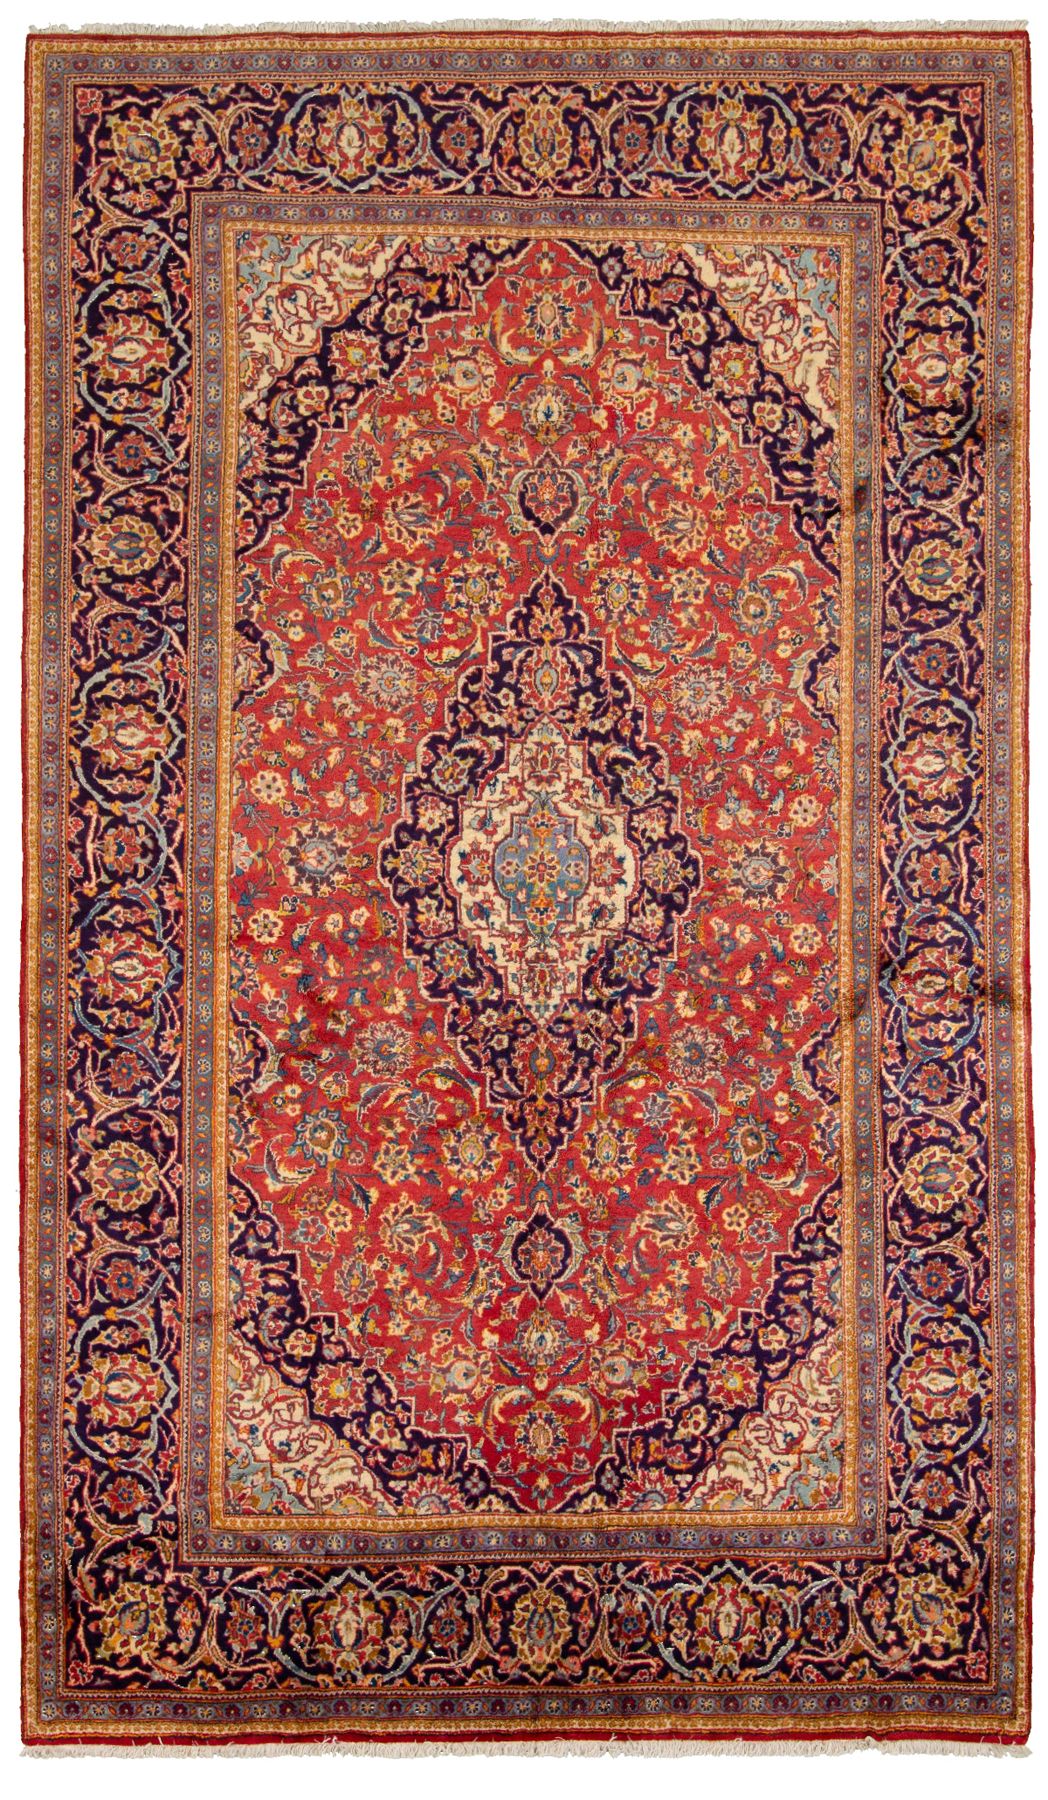 Hand-knotted Kashan  Wool Rug 6'4" x 10'11" Size: 6'4" x 10'11"  